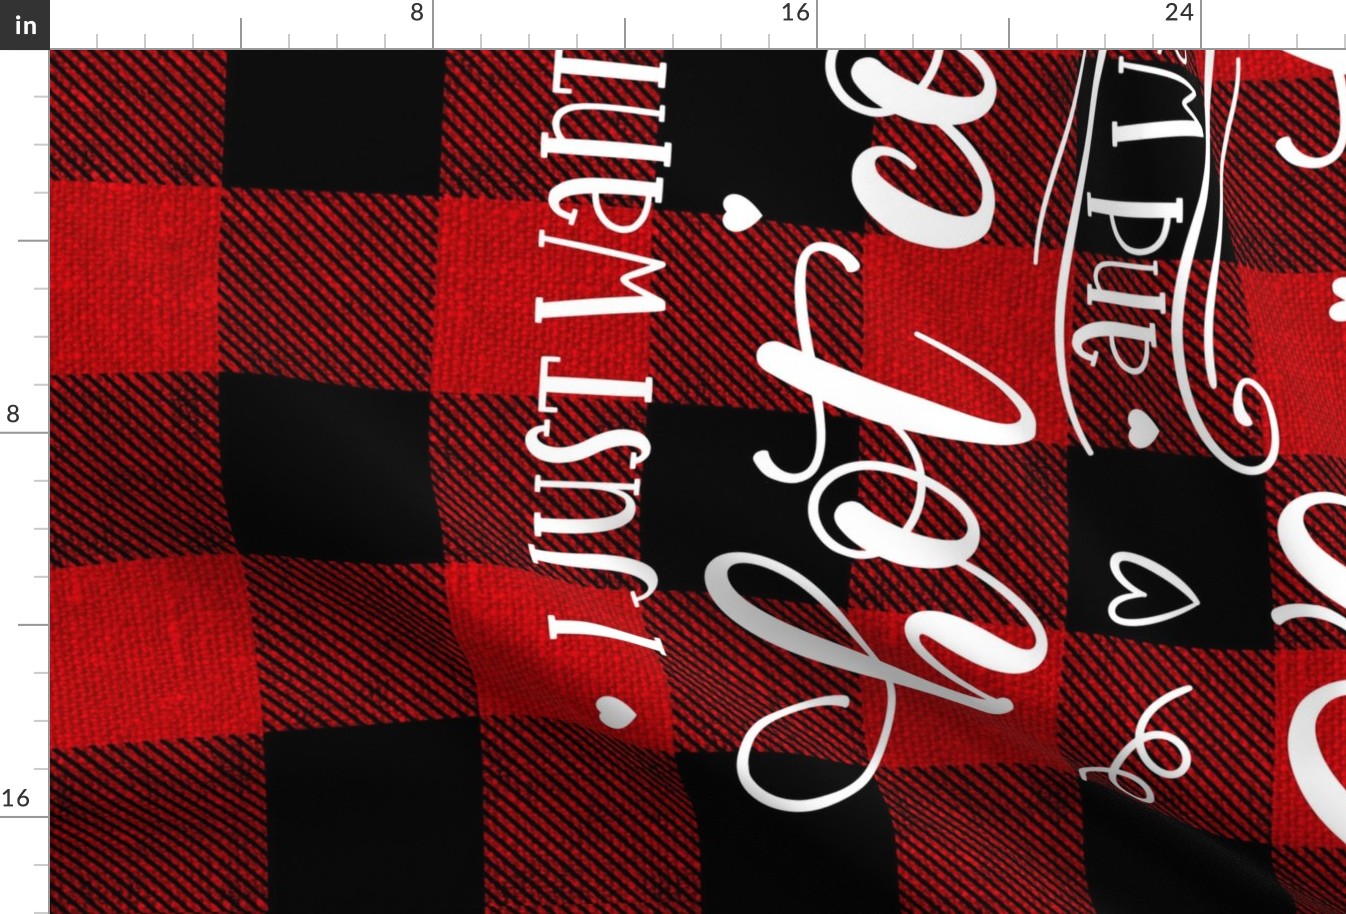 Minky Blanket 36 x 54 inches-Buffalo plaid Cocoa and Christmas Movie rotated